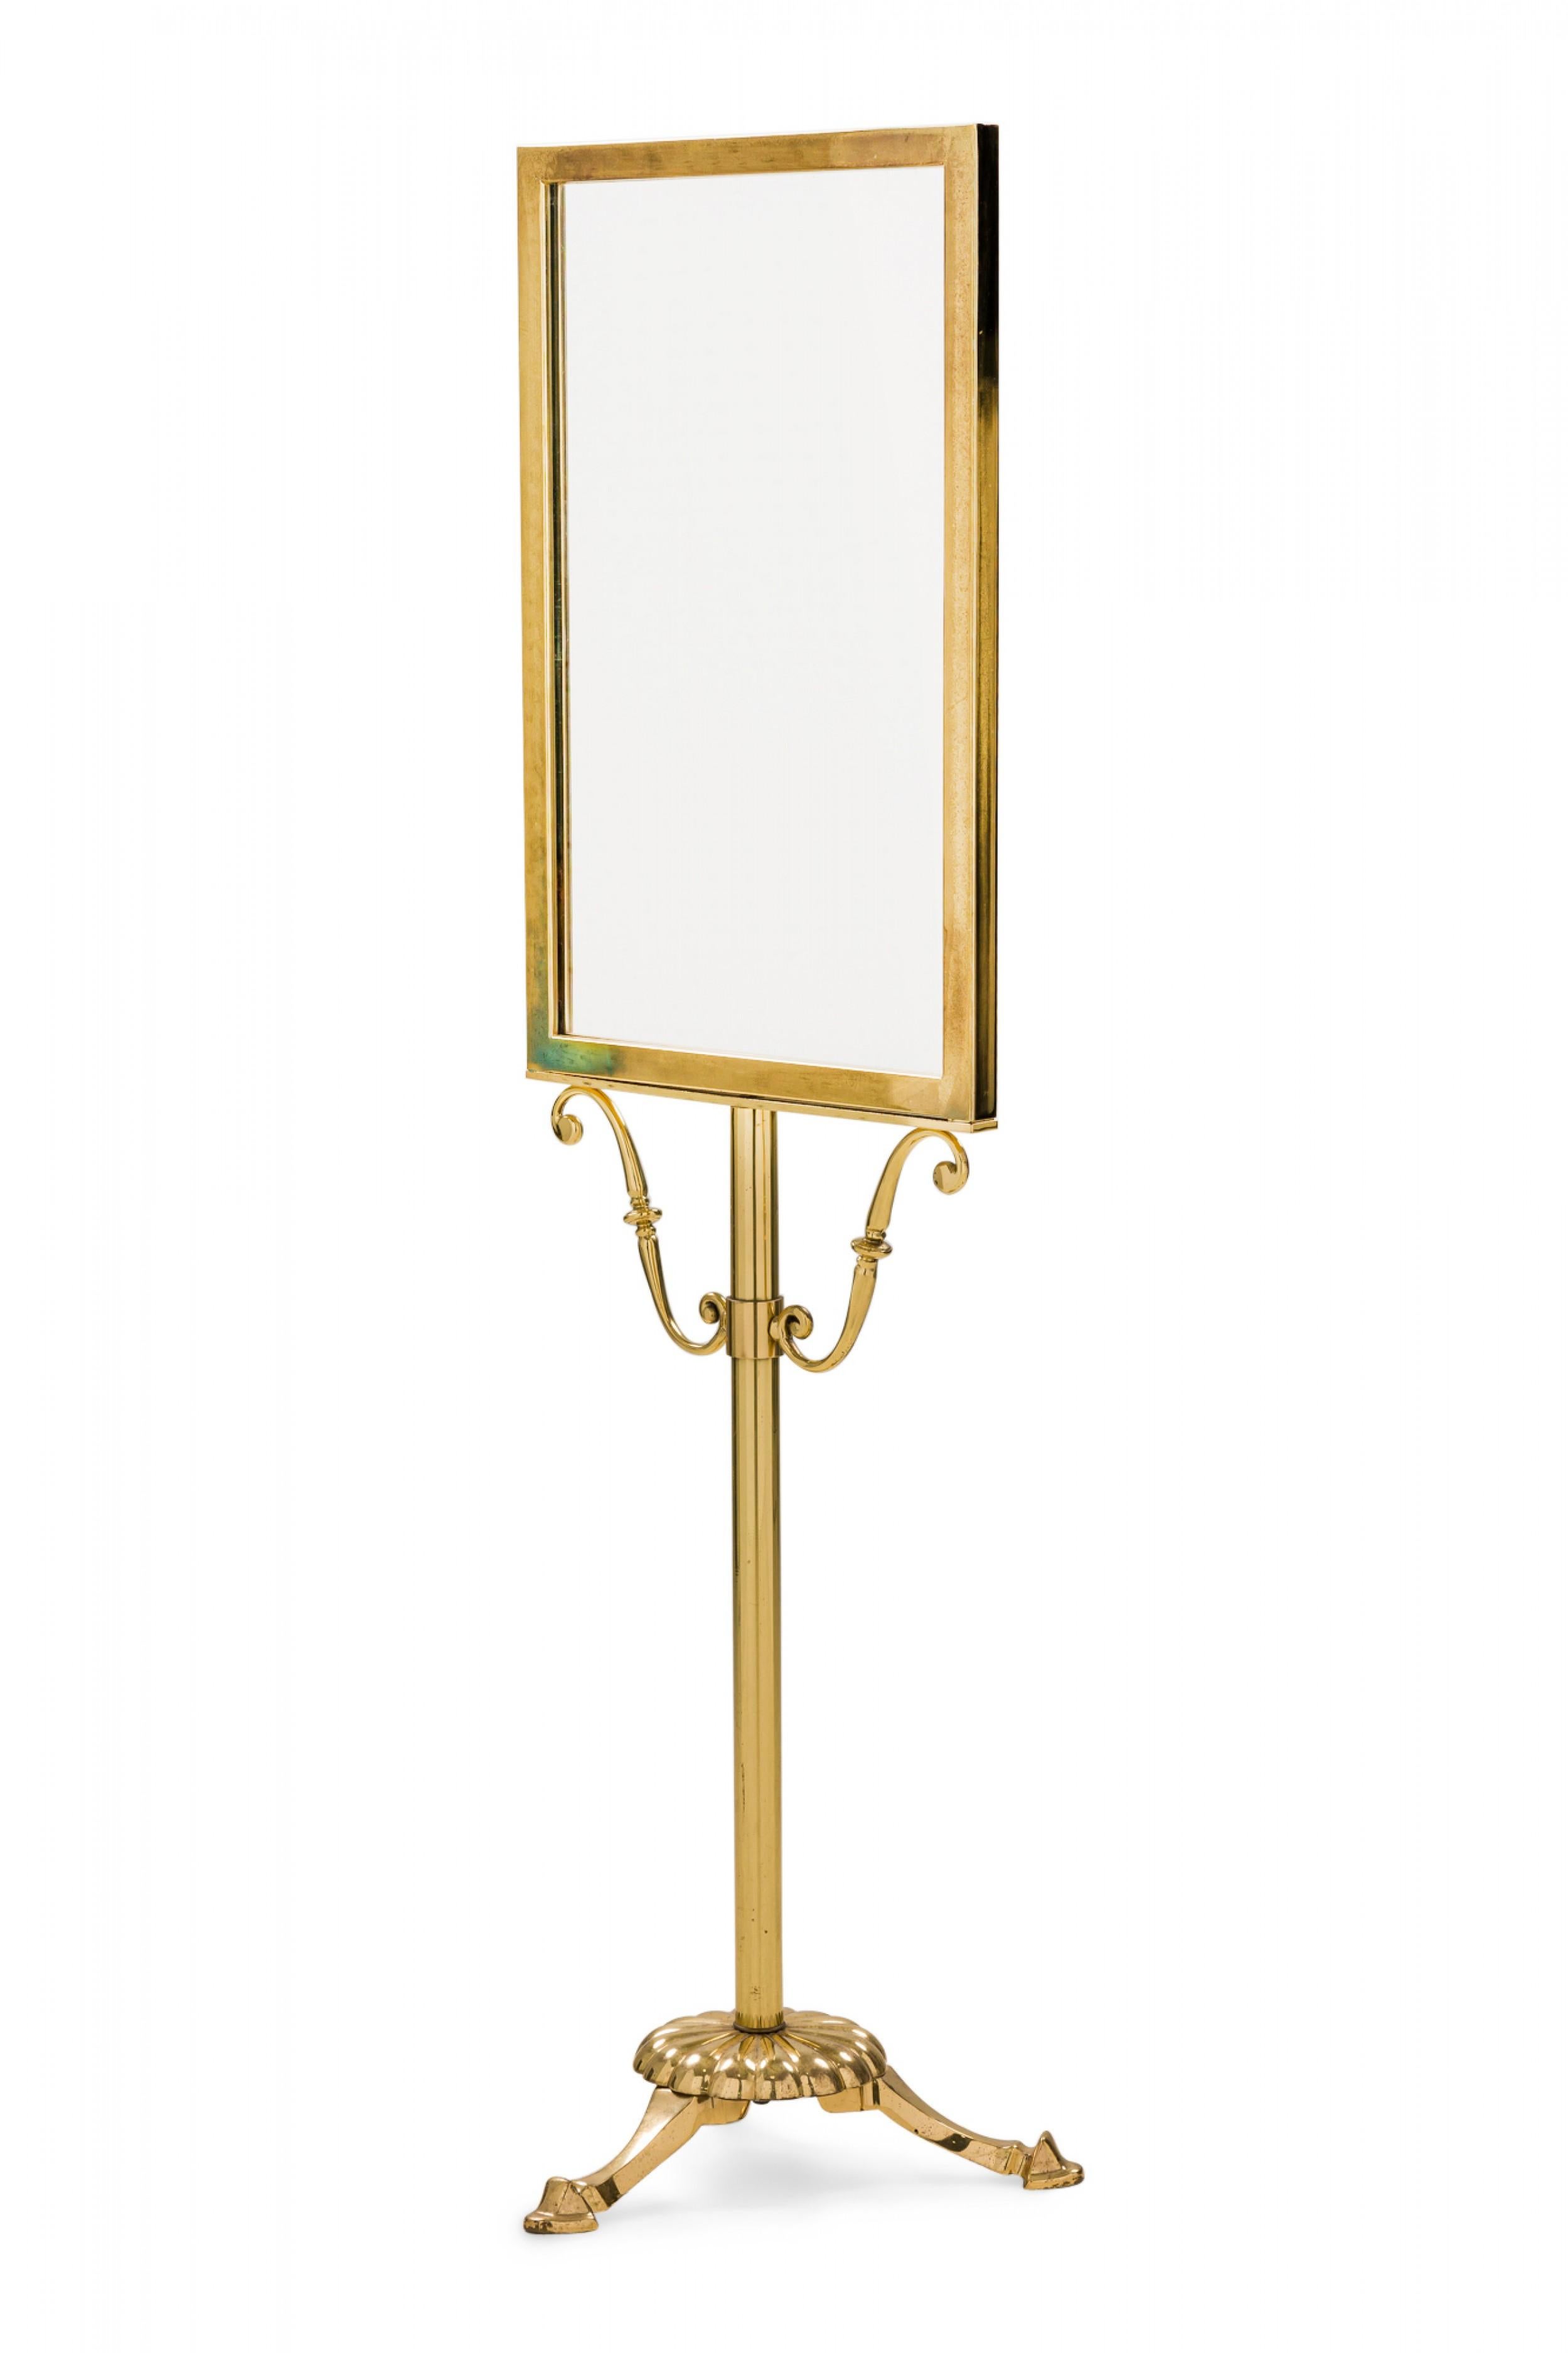 Vintage gilt metal menu / picture frame display stand with a rectangular upper frame supported by a tripod base with scrollwork detail and three small hoof feet.
  